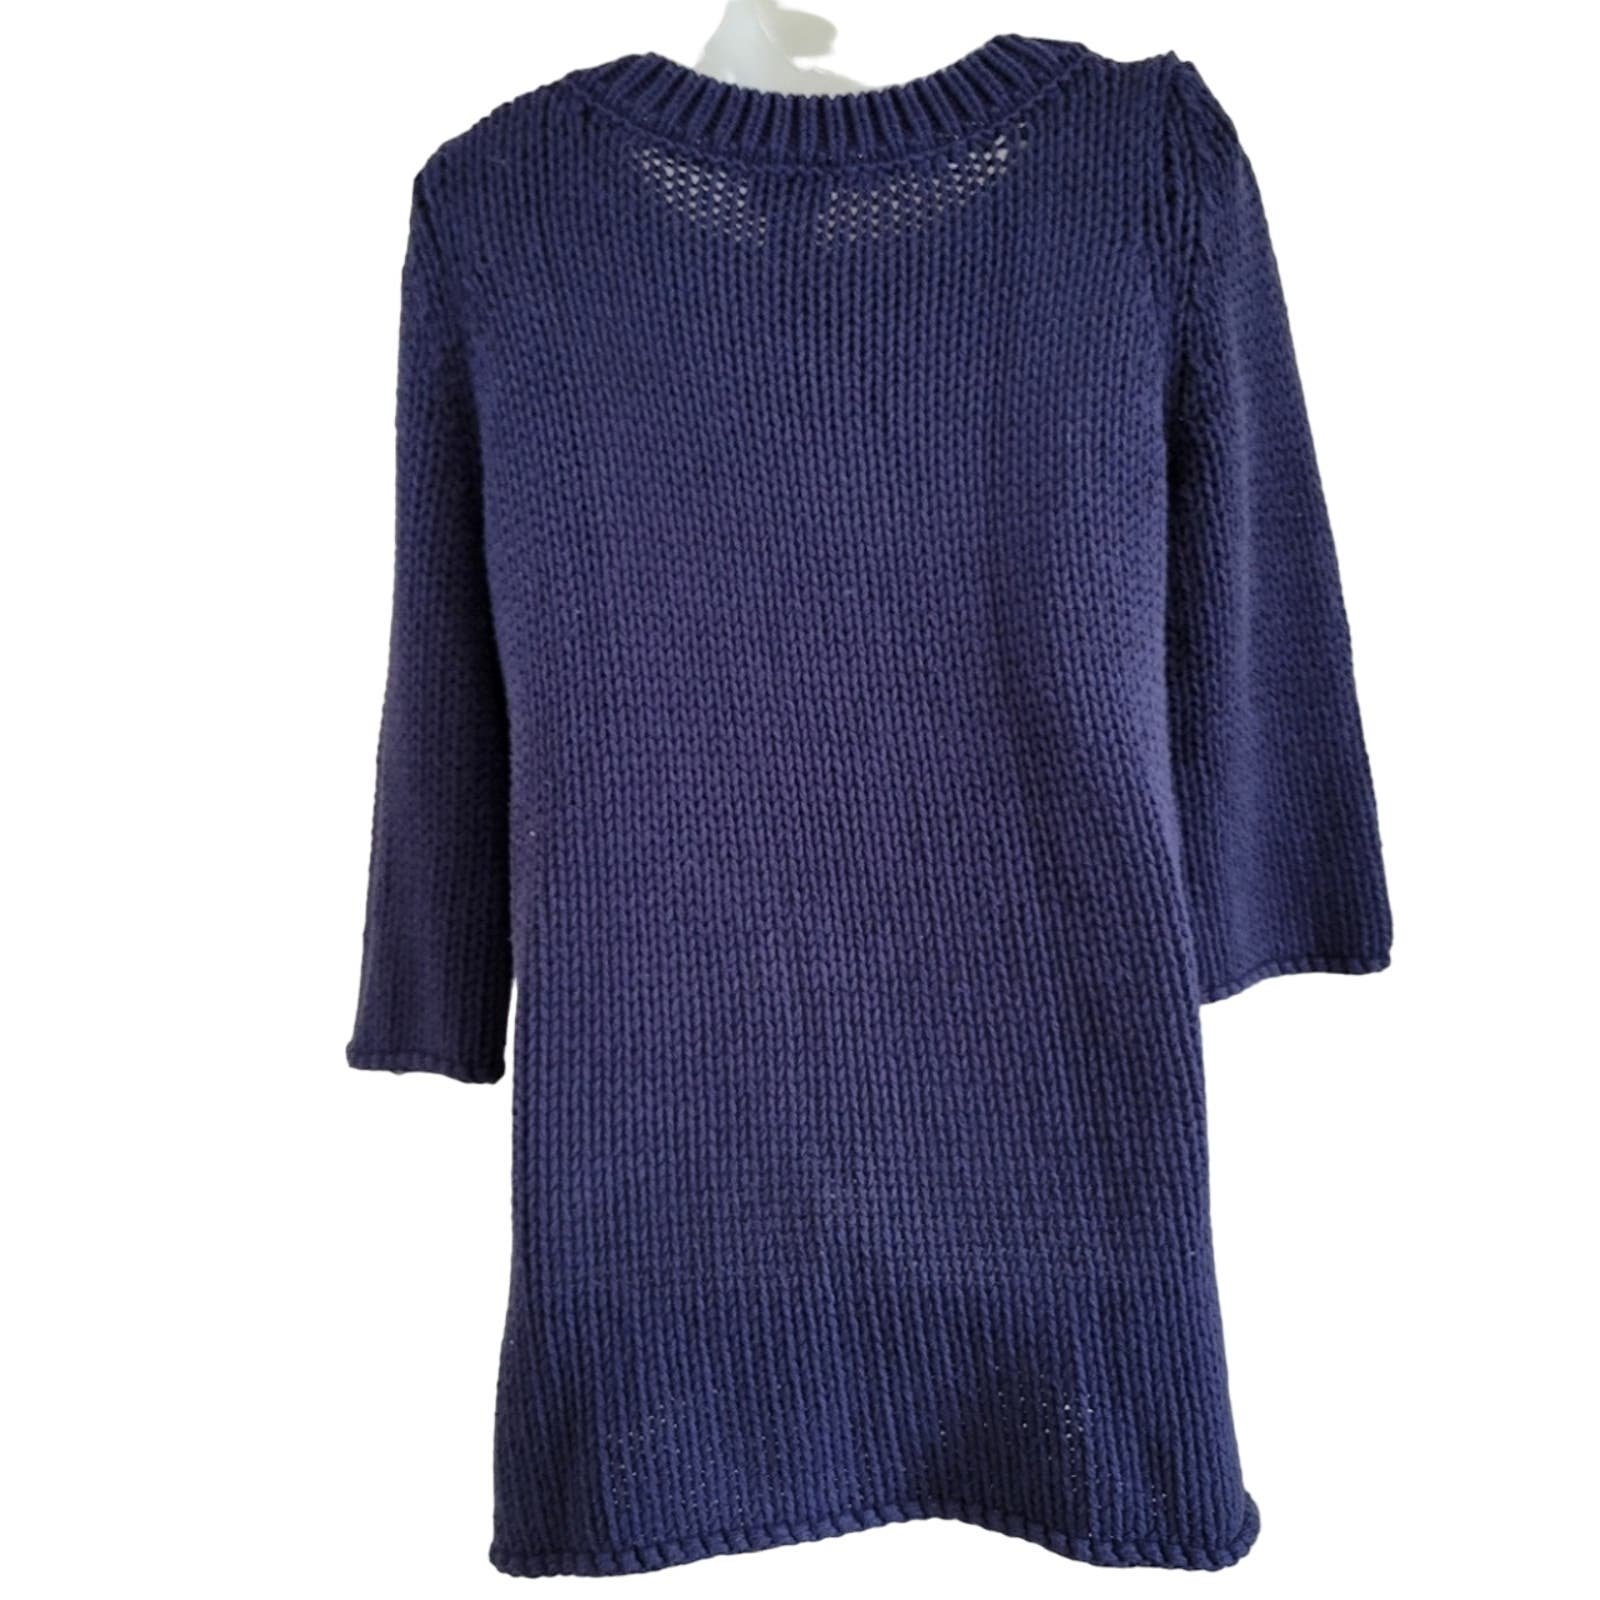 Discounted Soft Surroundings Open Loose Chunky Knit Sweater Dress Navy Blue Size Small KSptQ4hmA US Sale